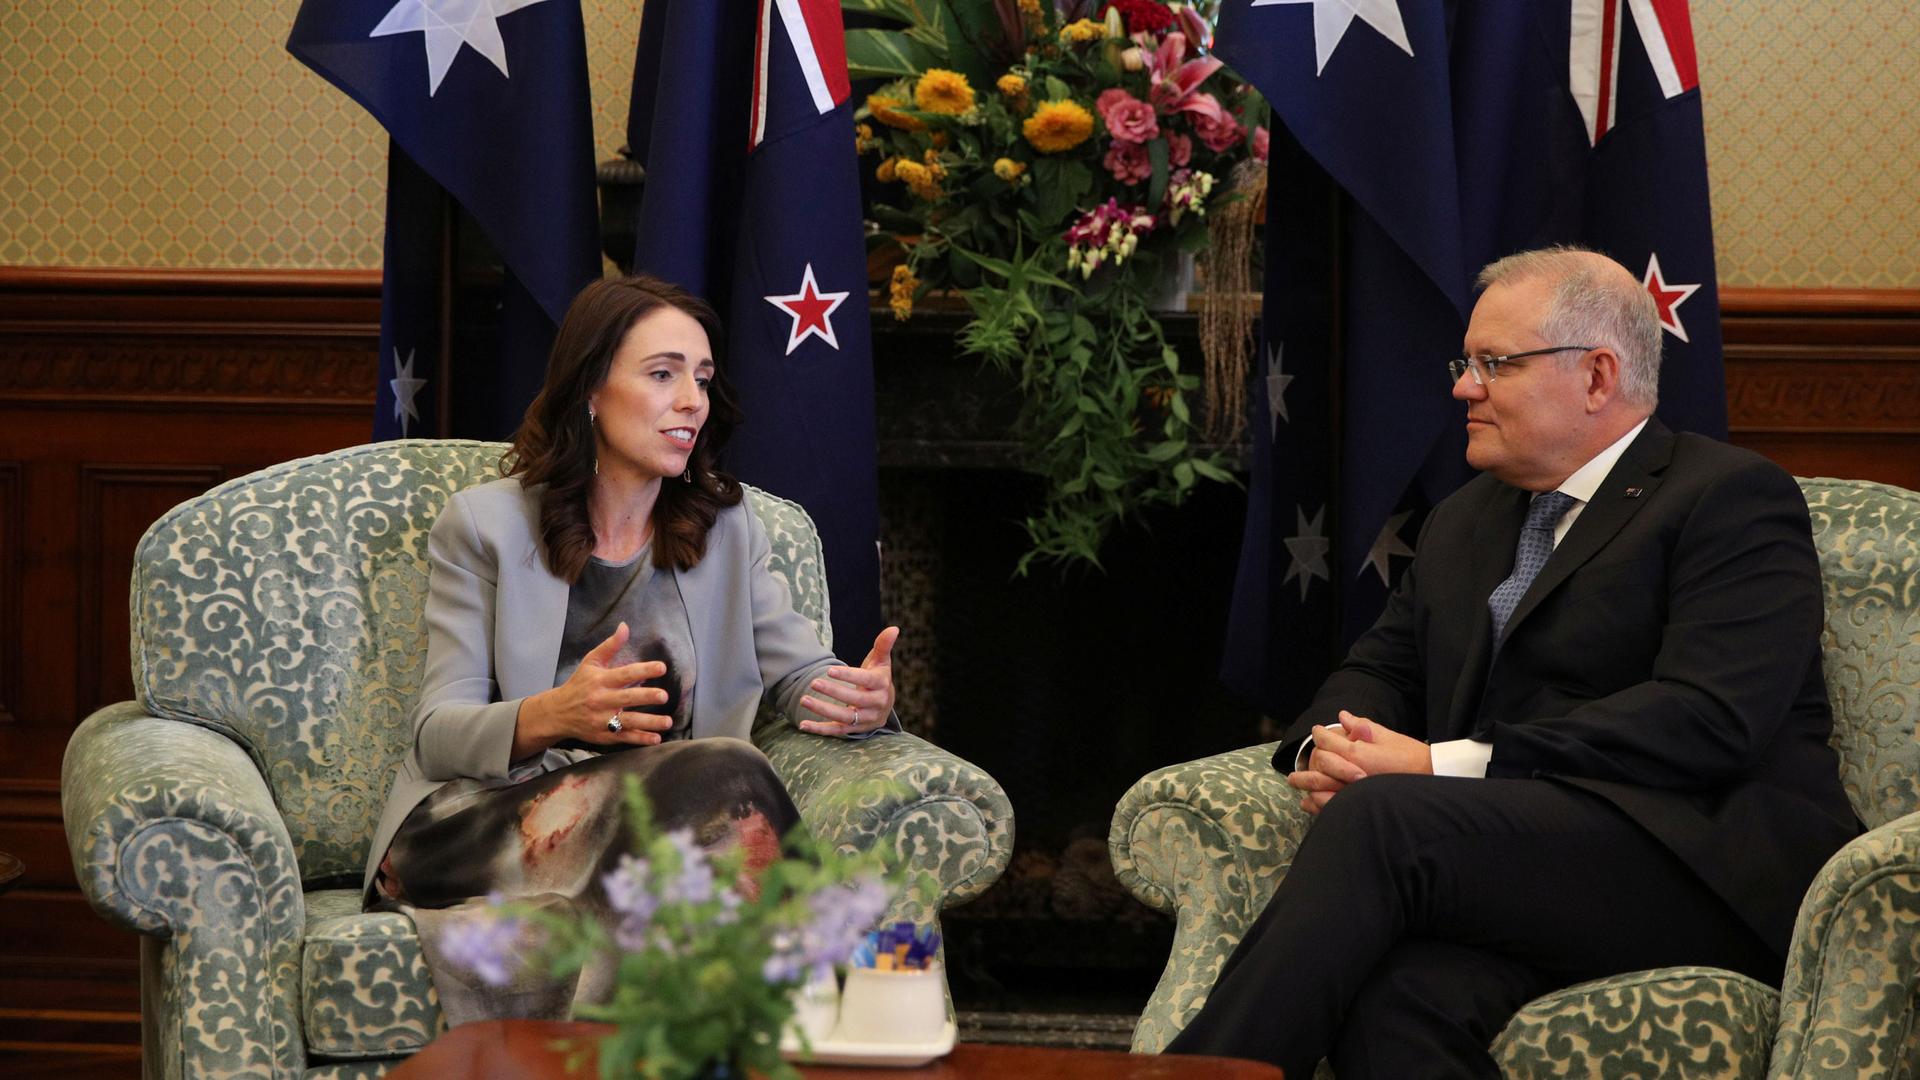 A woman and a man sit in chairs in front of the New Zealand and Australian flags